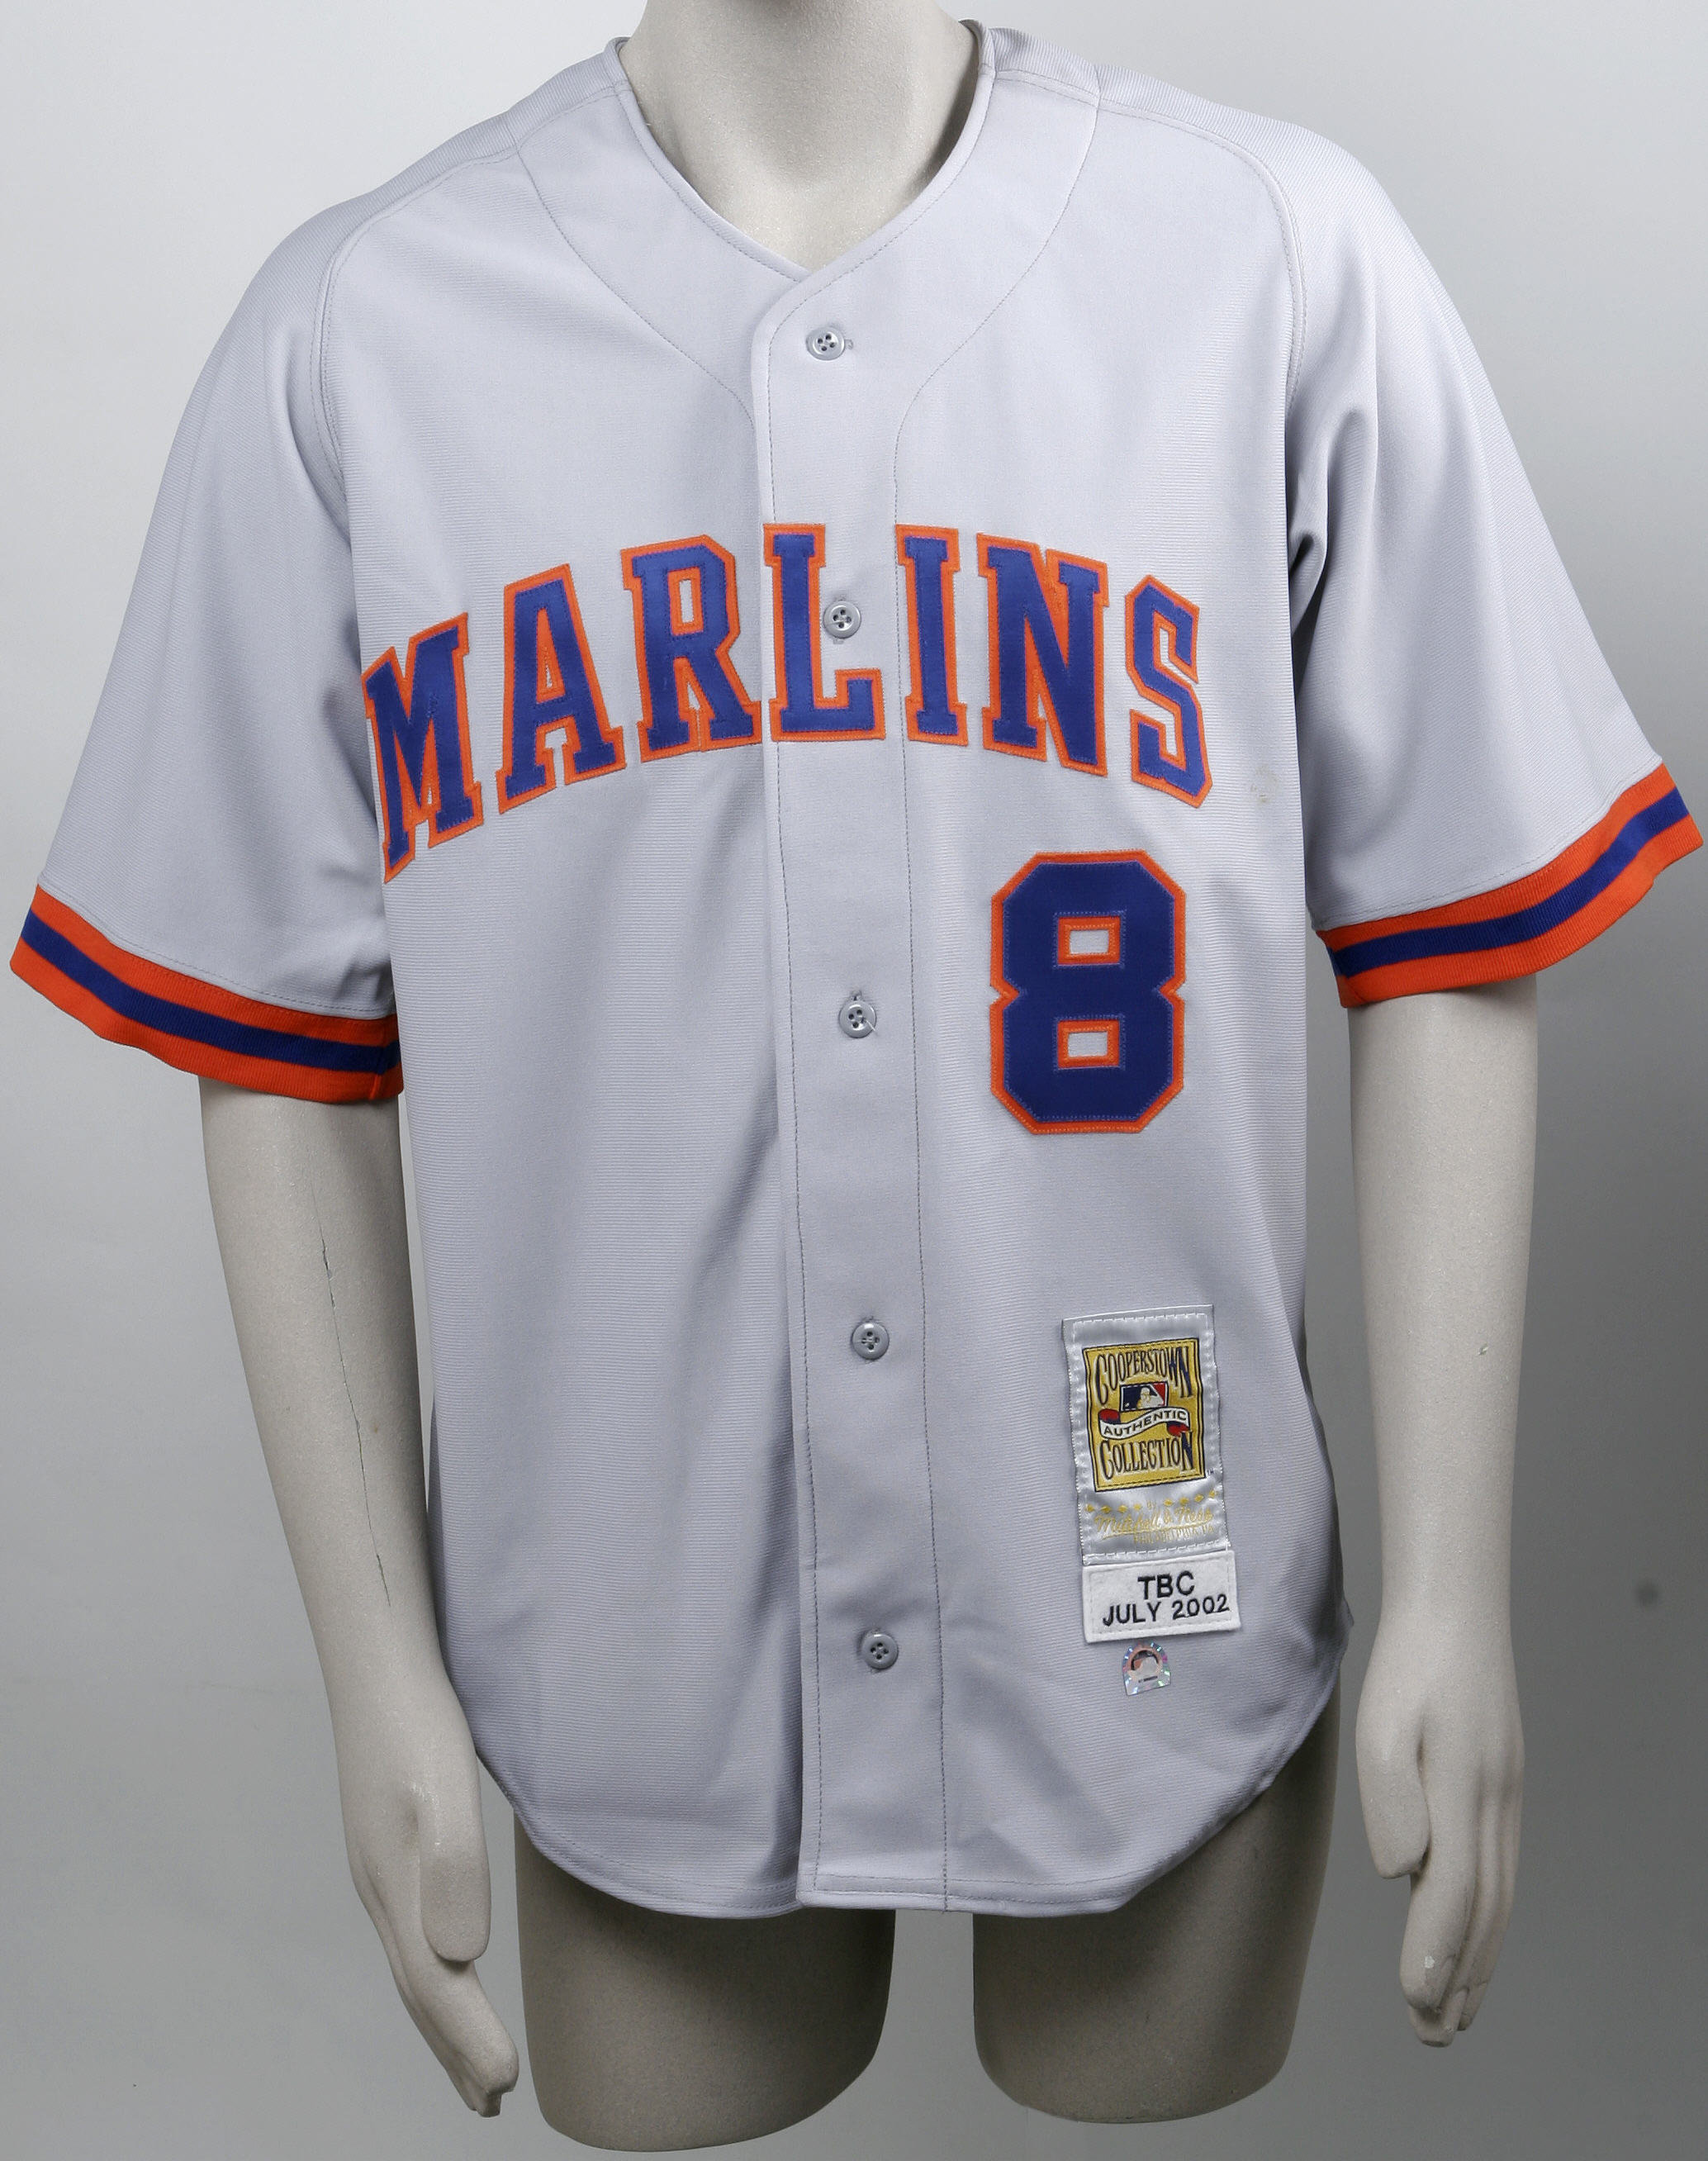 New Uniforms : I've been rocking “throwback” style Marlins